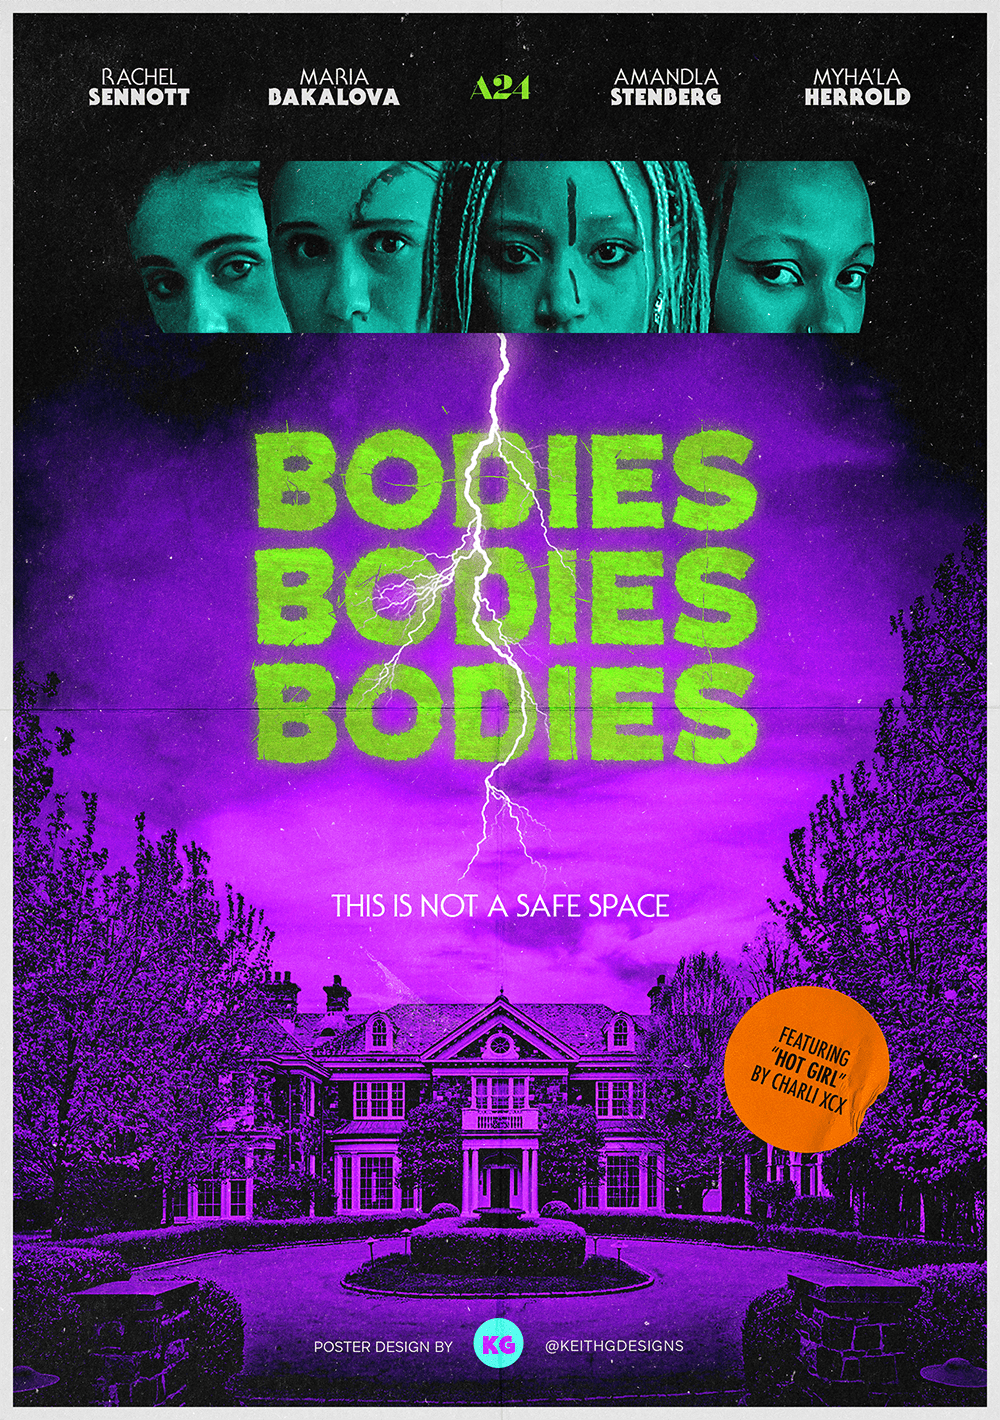 How to Play Bodies, Bodies, Bodies From A24's Horror Comedy